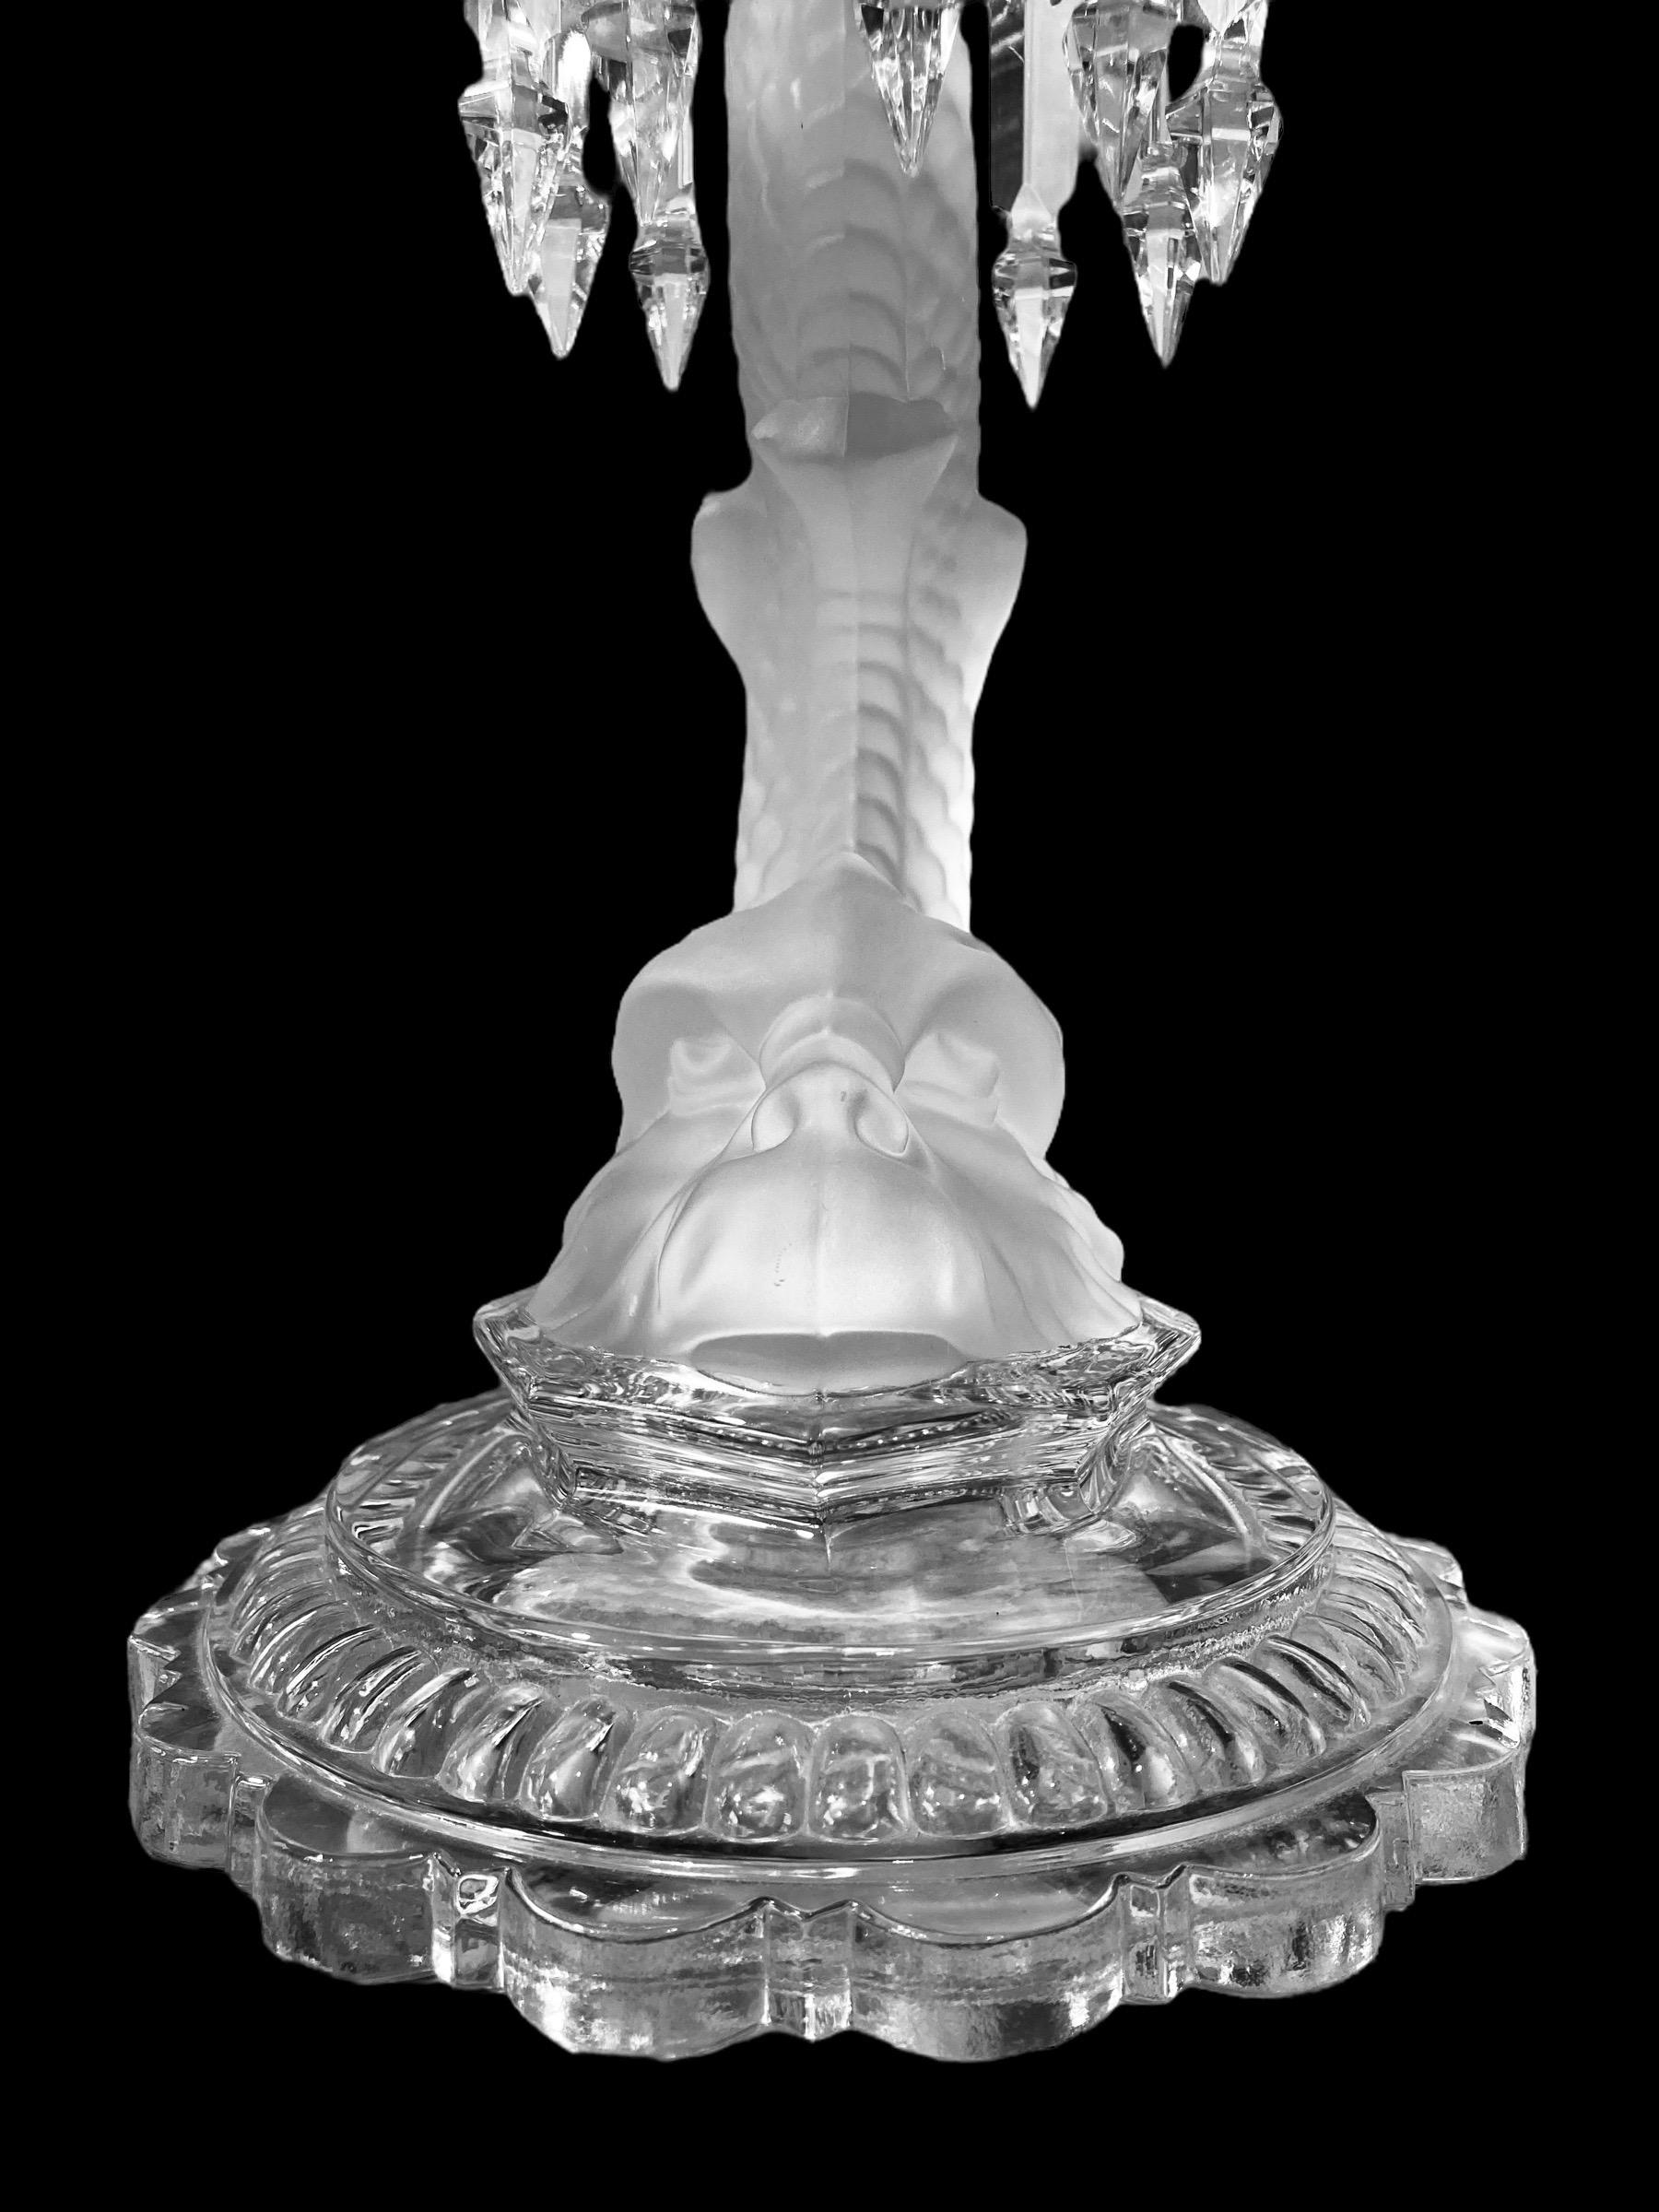 A Baccarat Crystal Lustre Candlestick with etched glass hurricane shade and frosted figural dolphin. Both shade and base are signed Baccarat and are in virtually unused condition

.The candlestick can be used with or without the shade